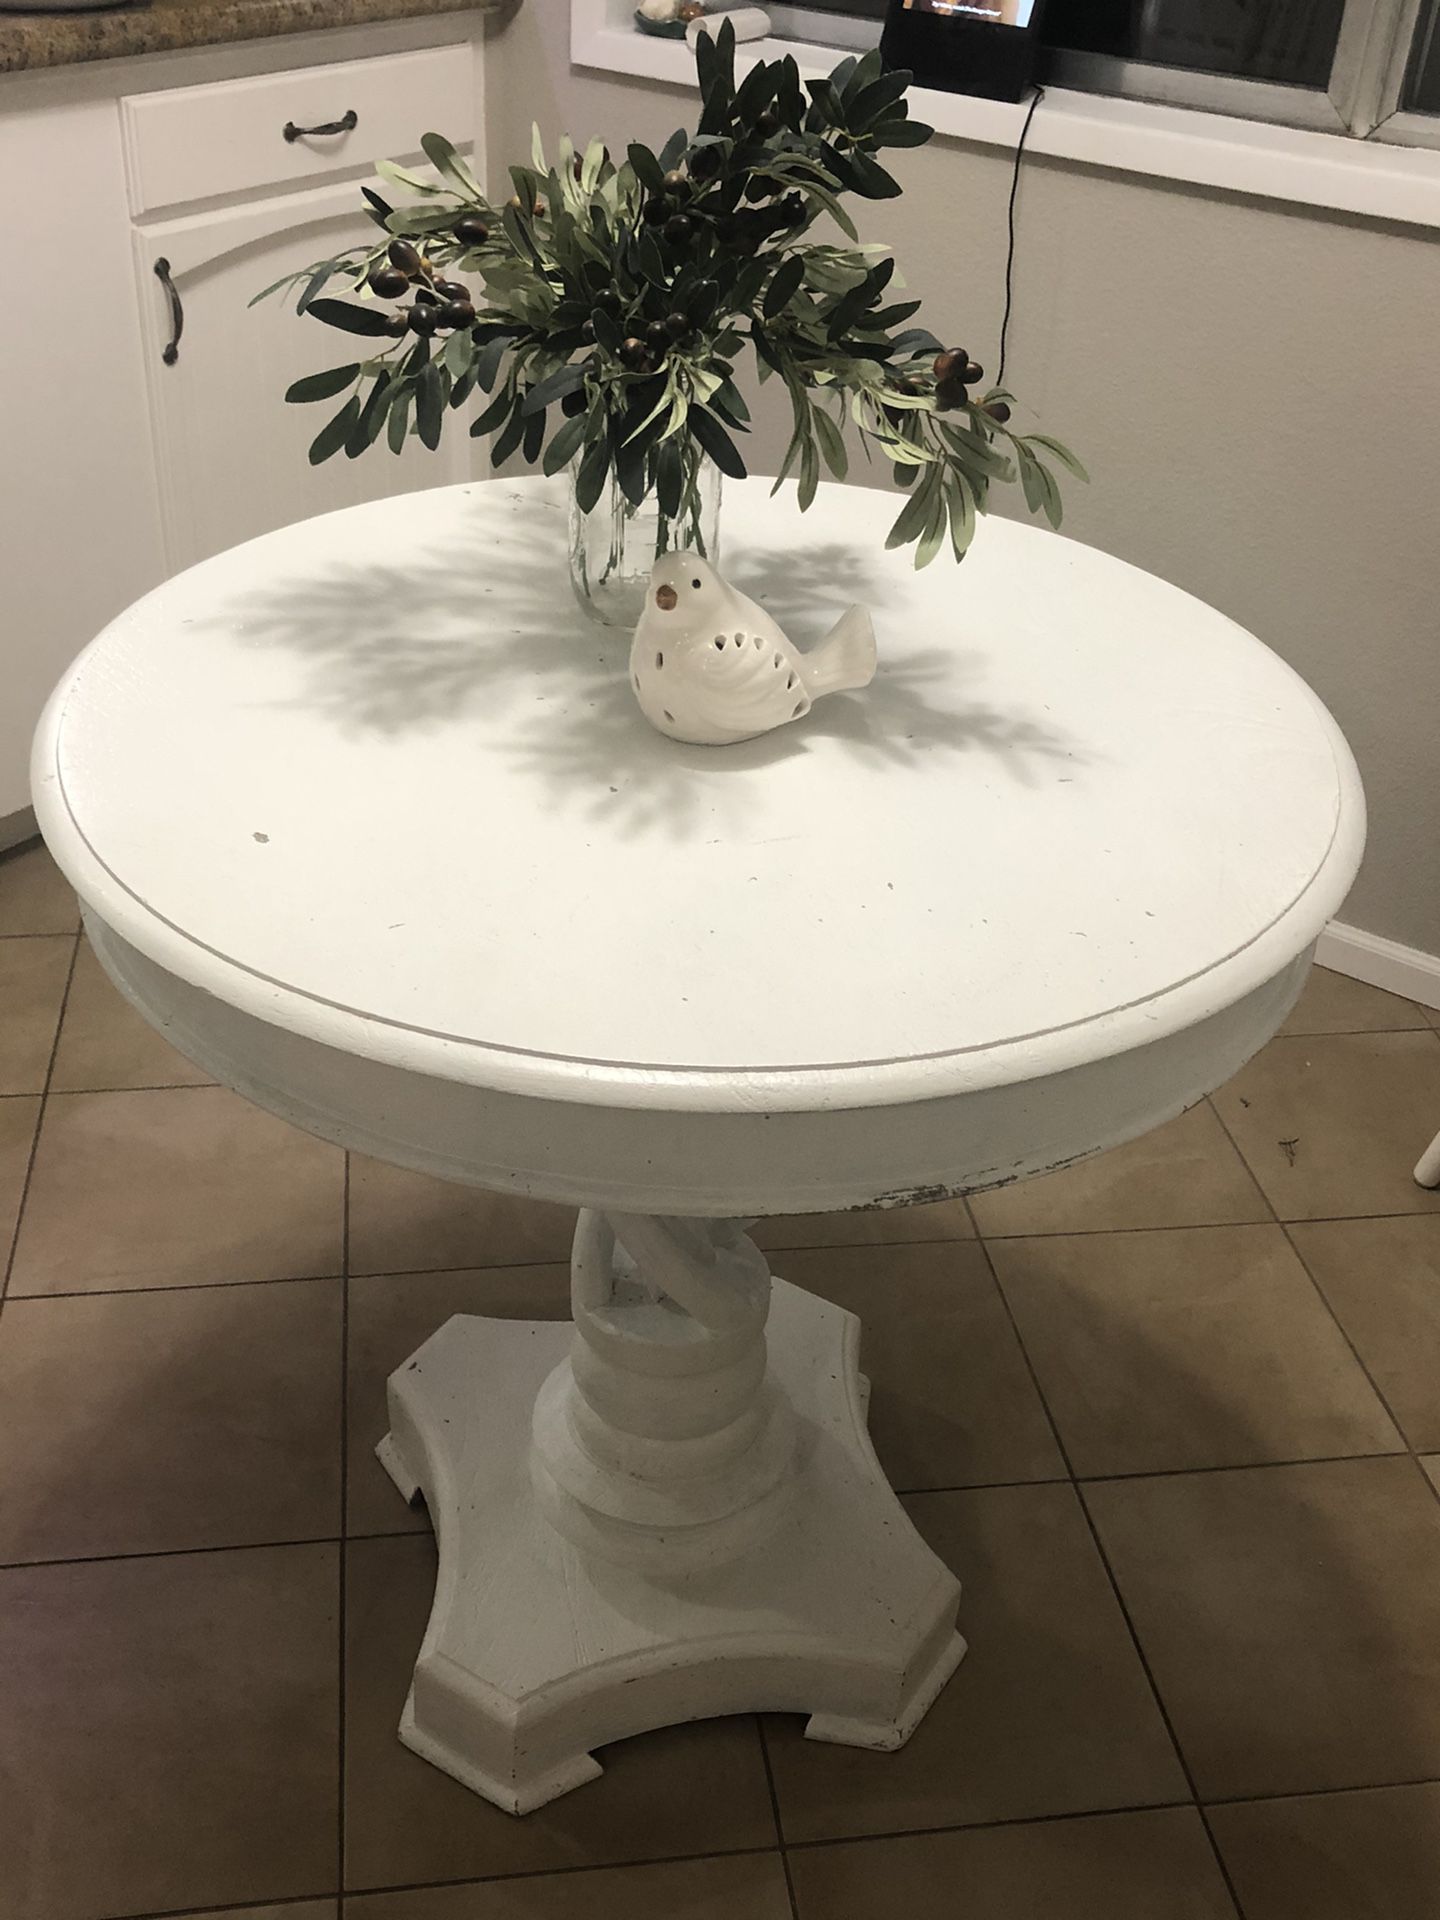 Small table 29.25” round, 29.25” tall